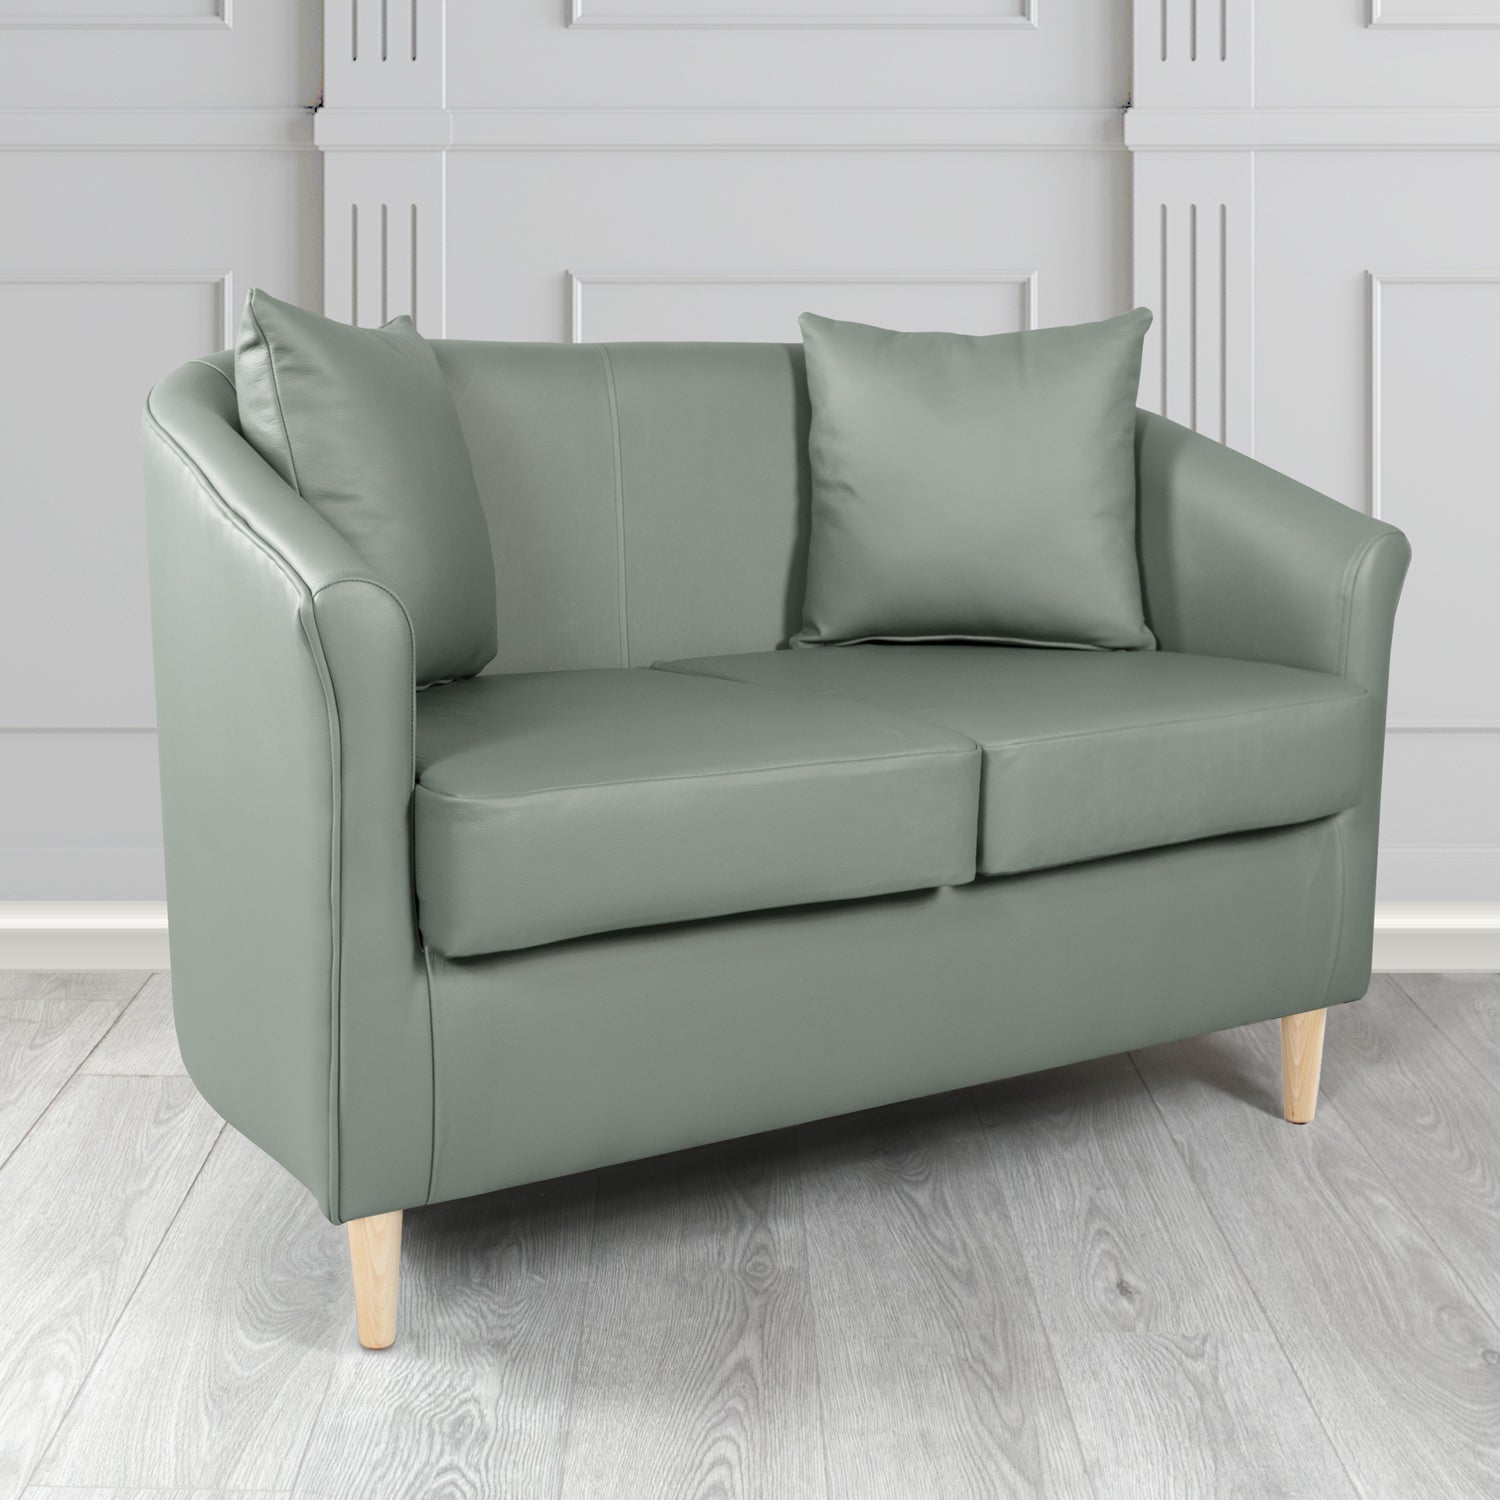 St Tropez Shelly Piping Crib 5 Genuine Leather 2 Seater Tub Sofa with Scatter Cushions - The Tub Chair Shop